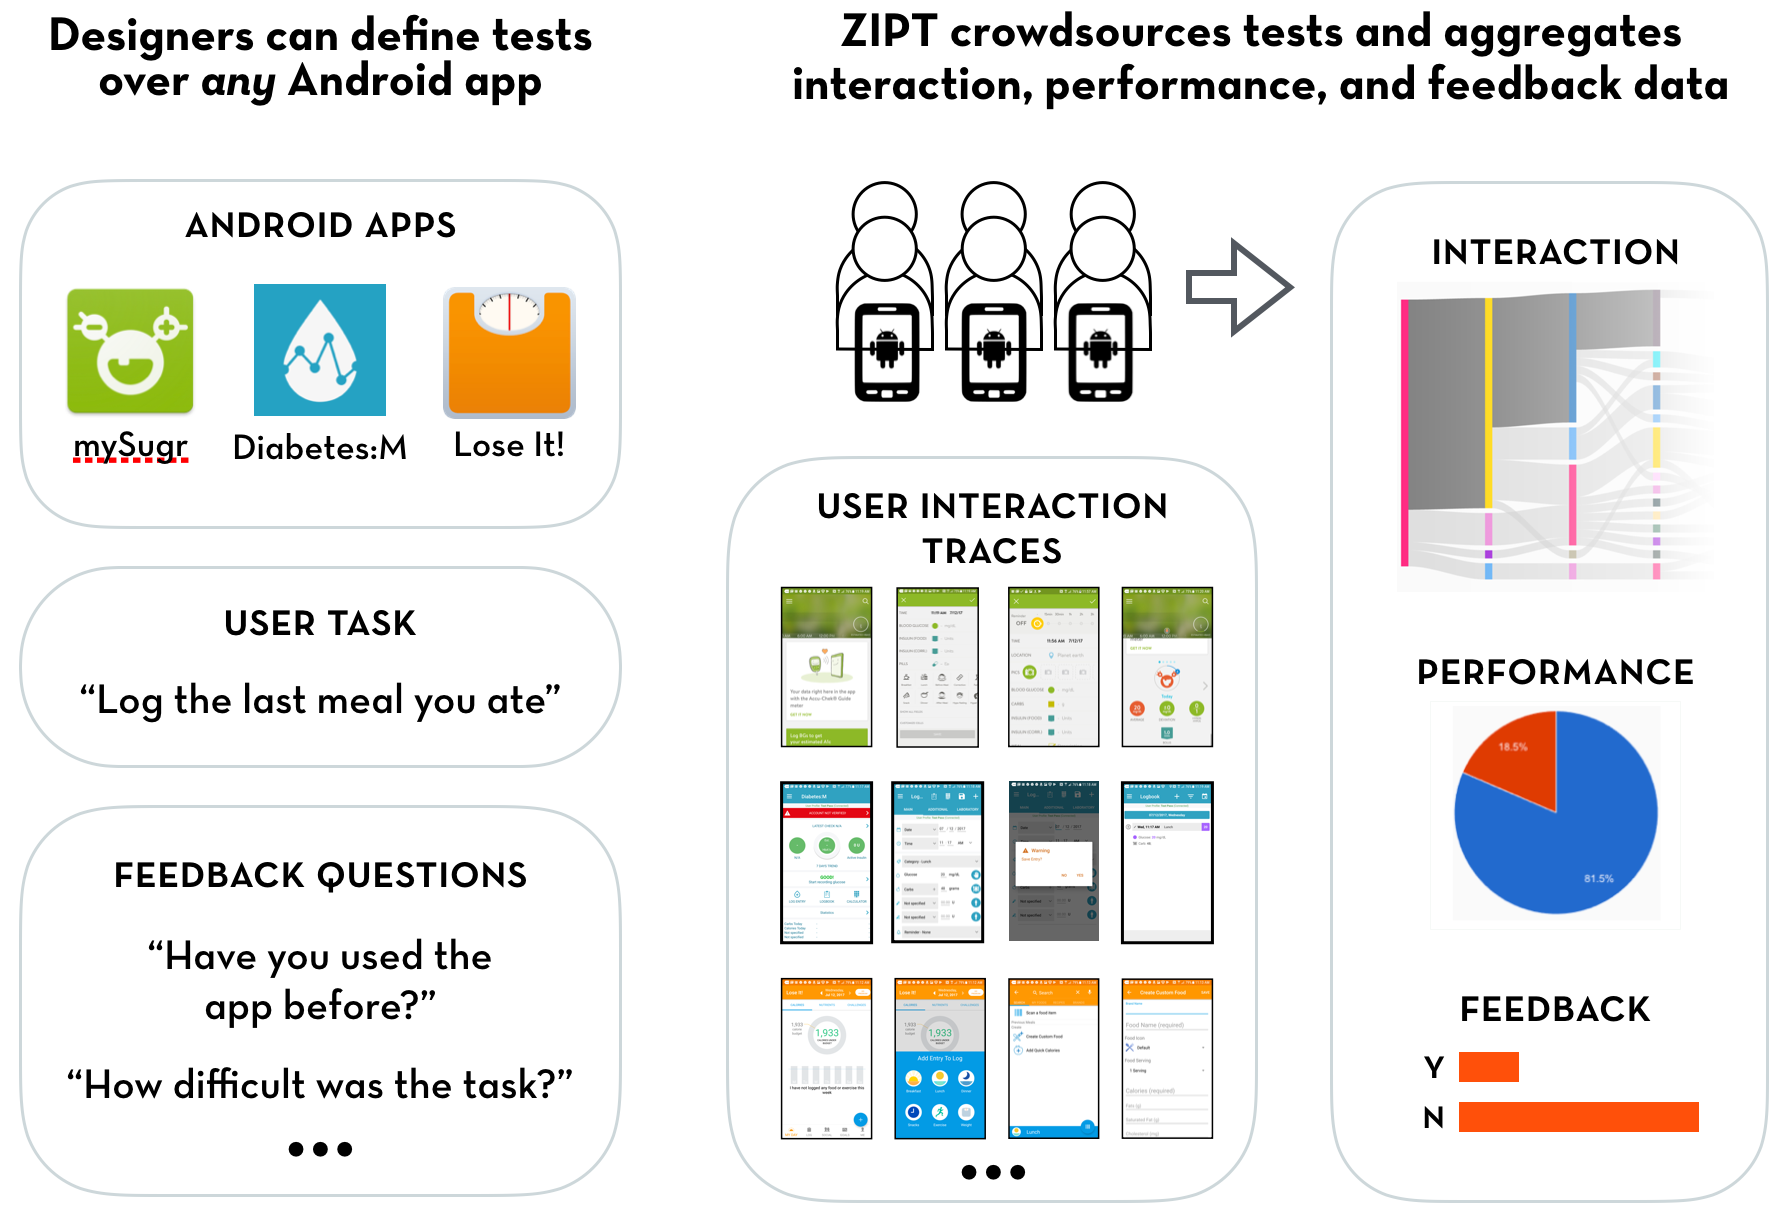 Designers can define tests over any Android app. ZIPT crowdsources tests and aggregates interaction, performance, and feedback data.